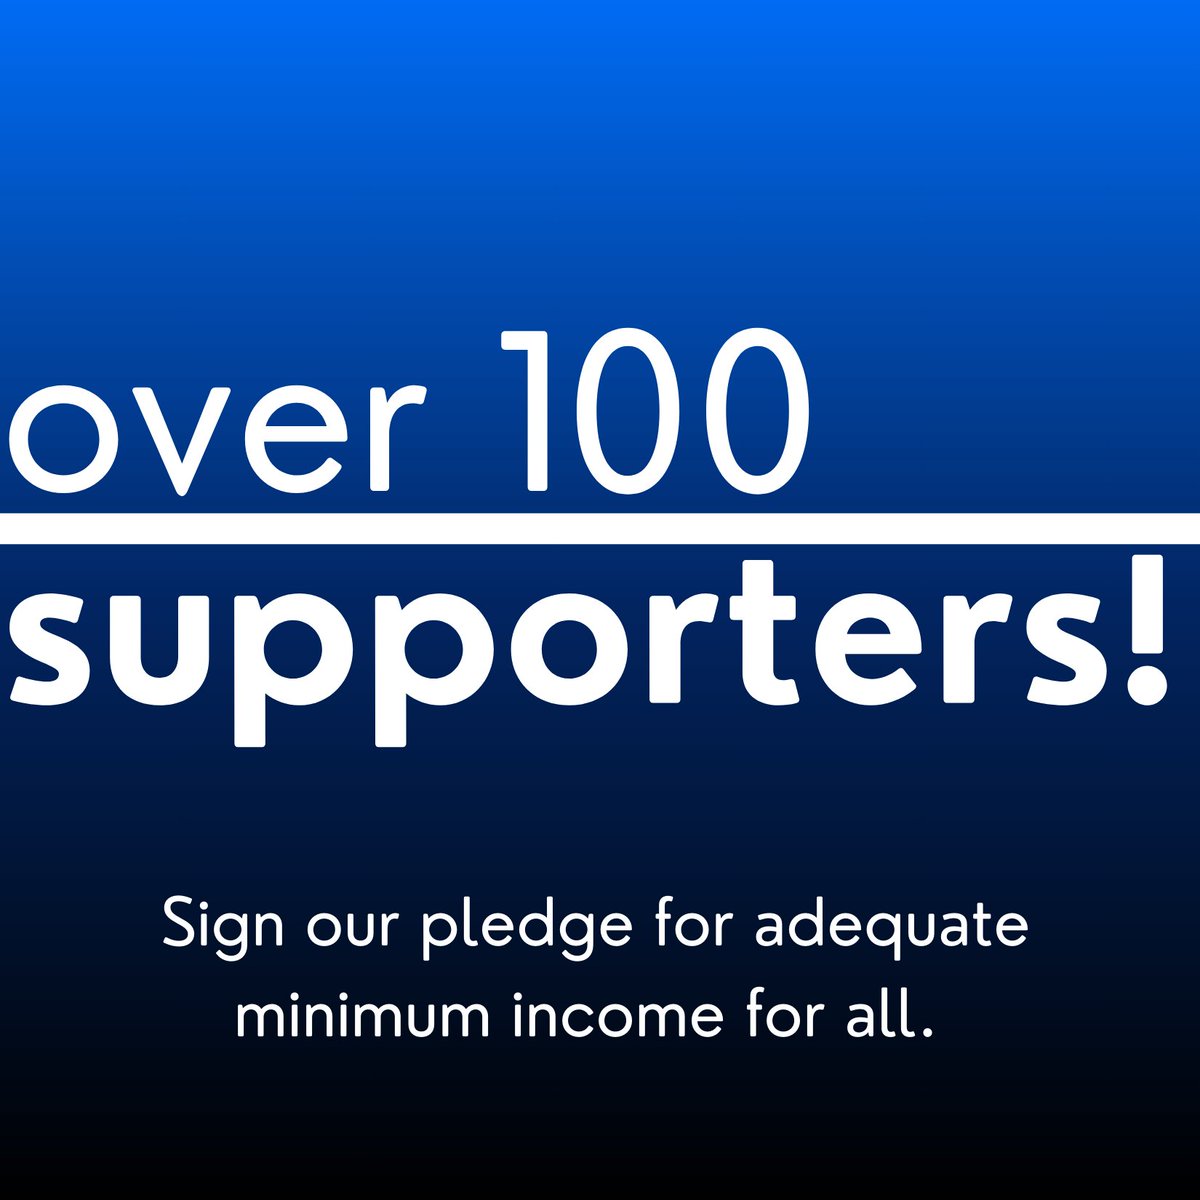 100+ supporters & counting! 📣 Thank you to all #EUelections candidates who have pledged to support adequate minimum income. It's time for the EU to make progress on tackling poverty. Sign up now to advance social rights & bring everyone #OvertheLine! 👉 shorturl.at/mtKN1